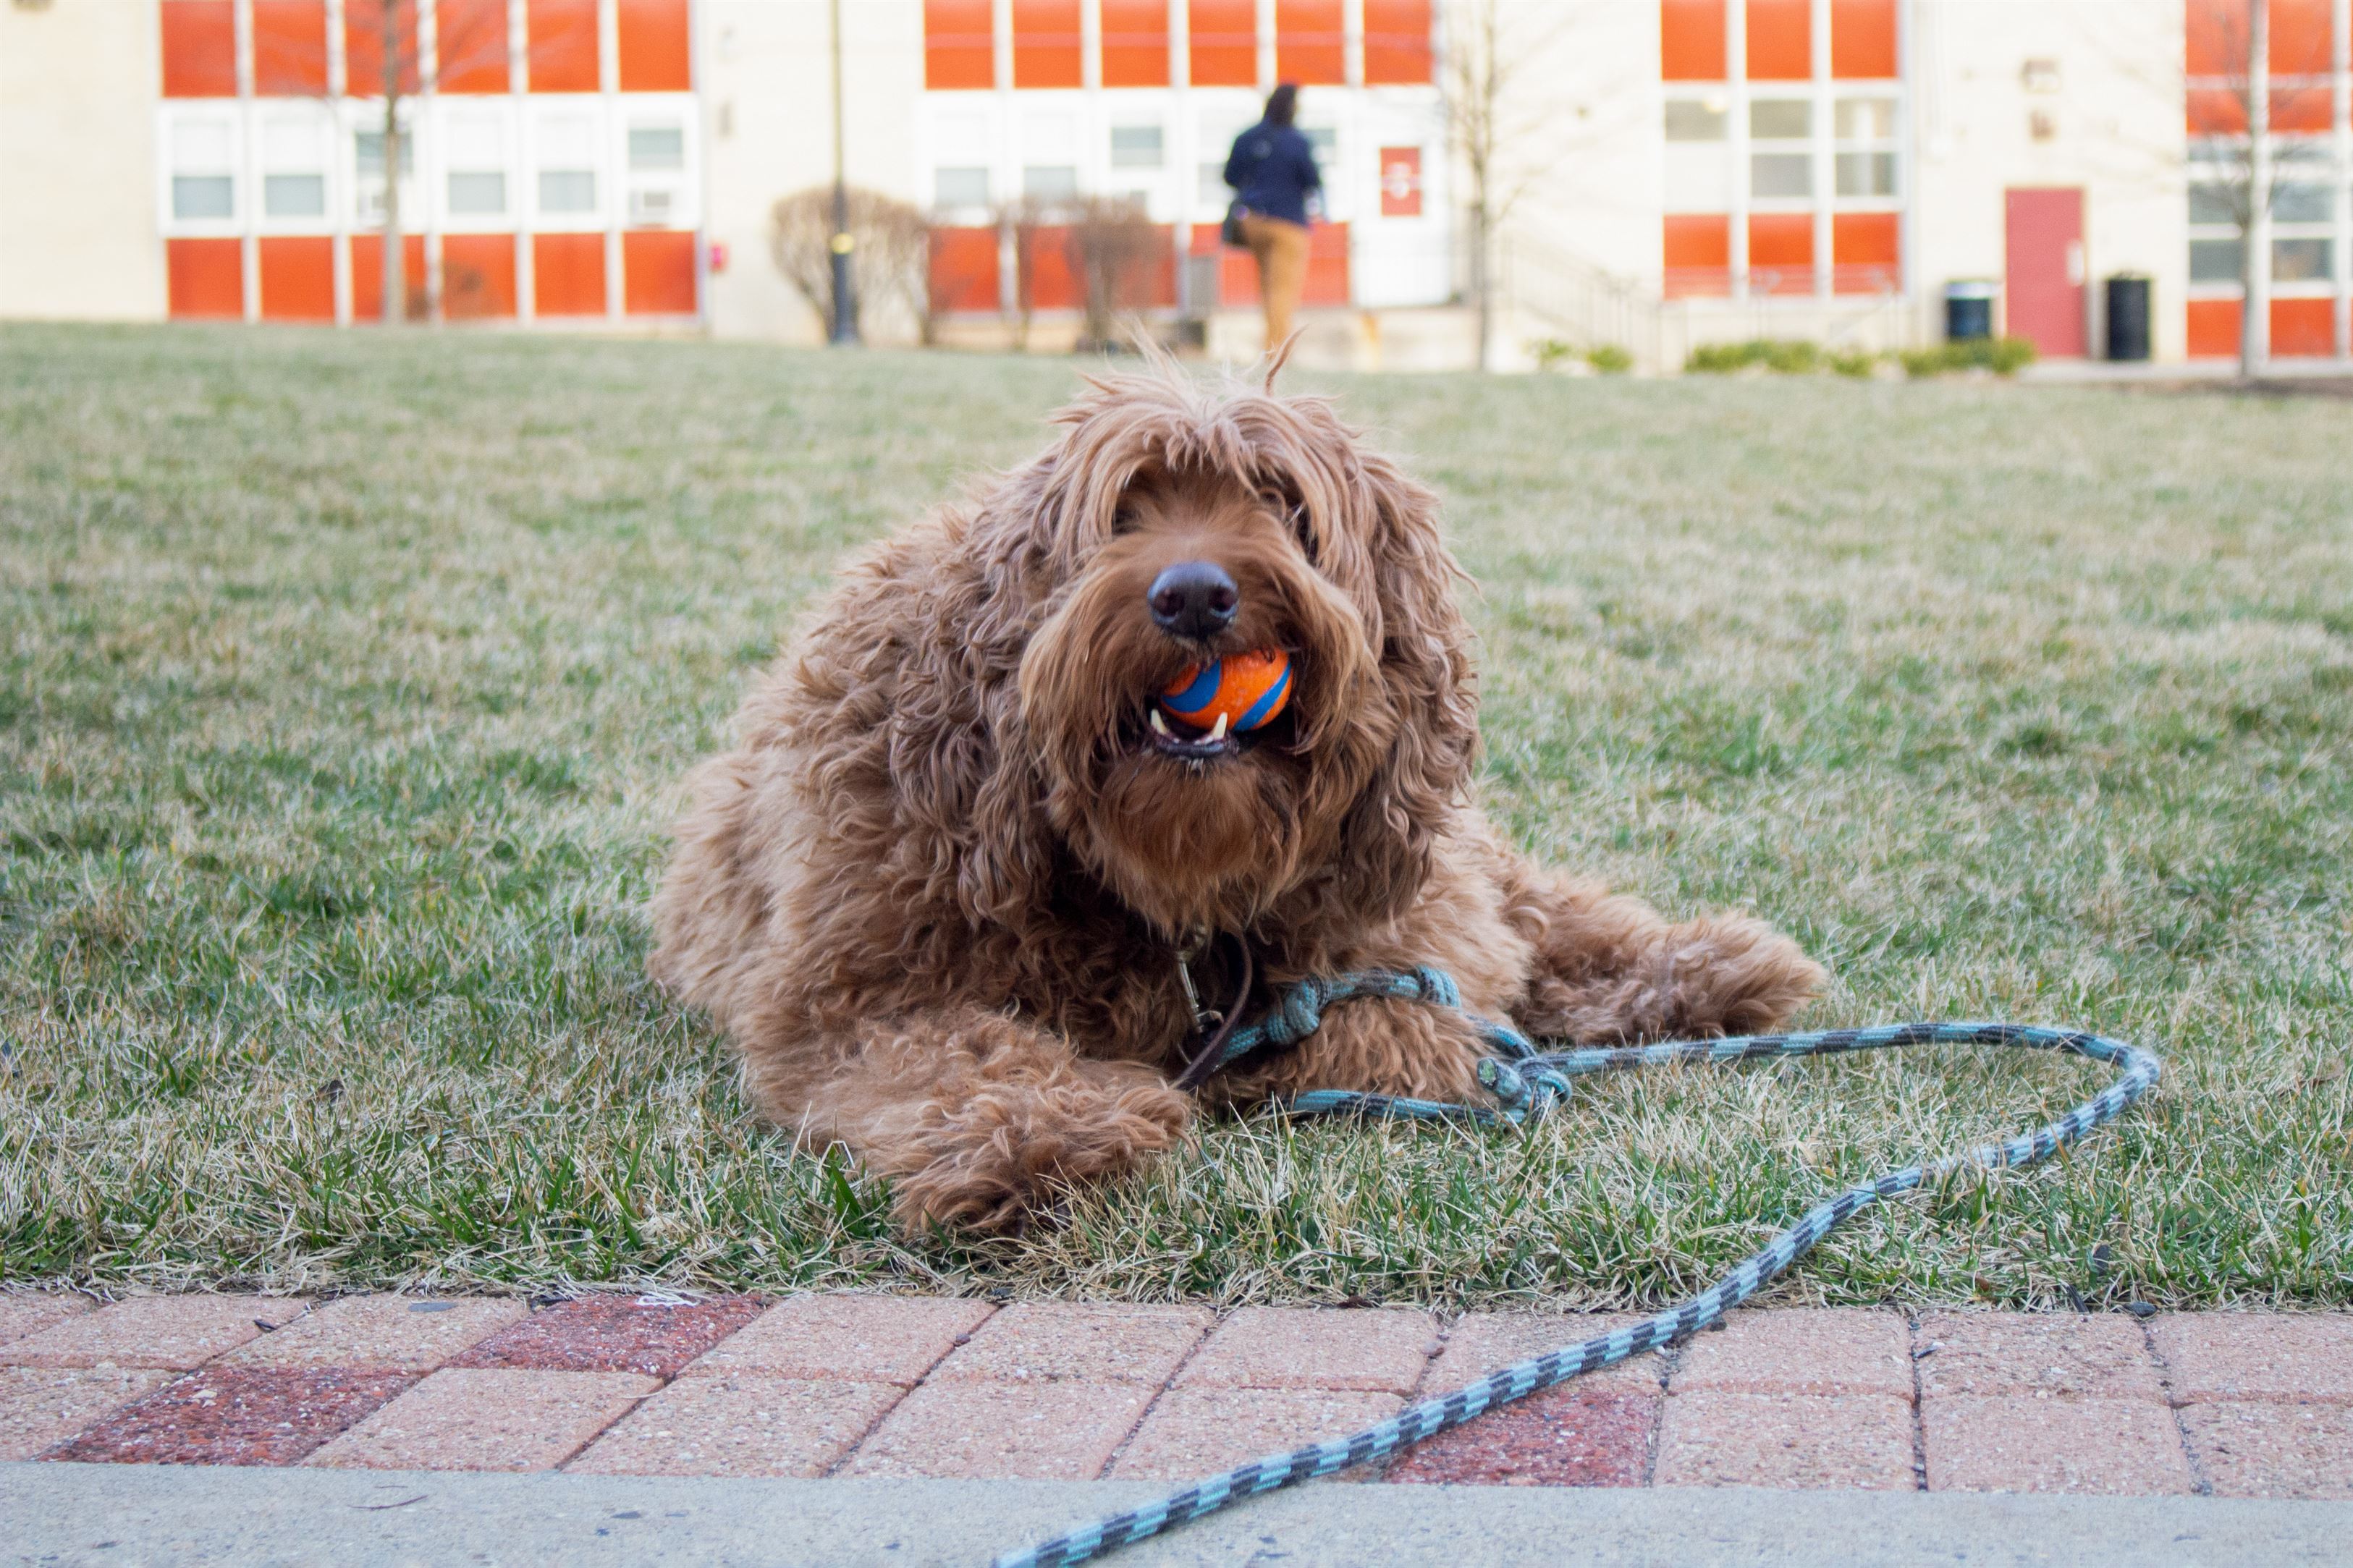 Simon, the pet of an advisor from the John C. Cali School of Music, will often be seen playing in the Freeman-Russ Quad.
Sal DiMaggio | The Montclarion